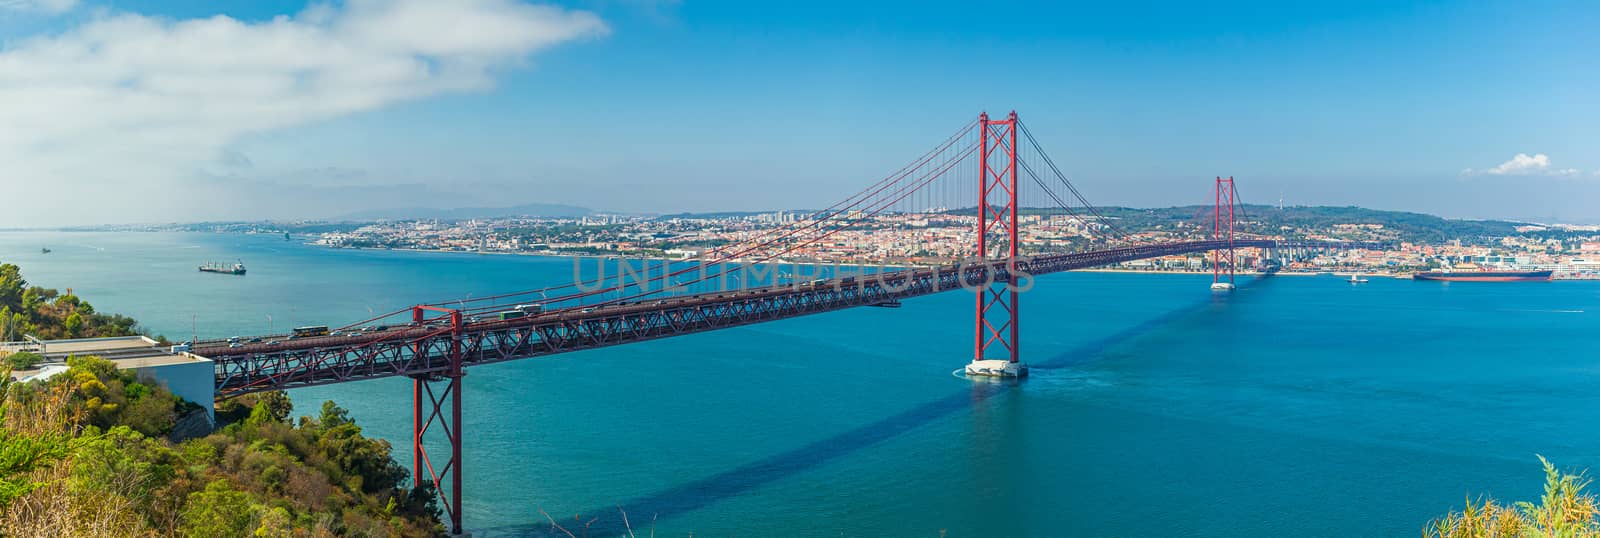 Lisbon Skyline panorama with the red iron bridge by COffe